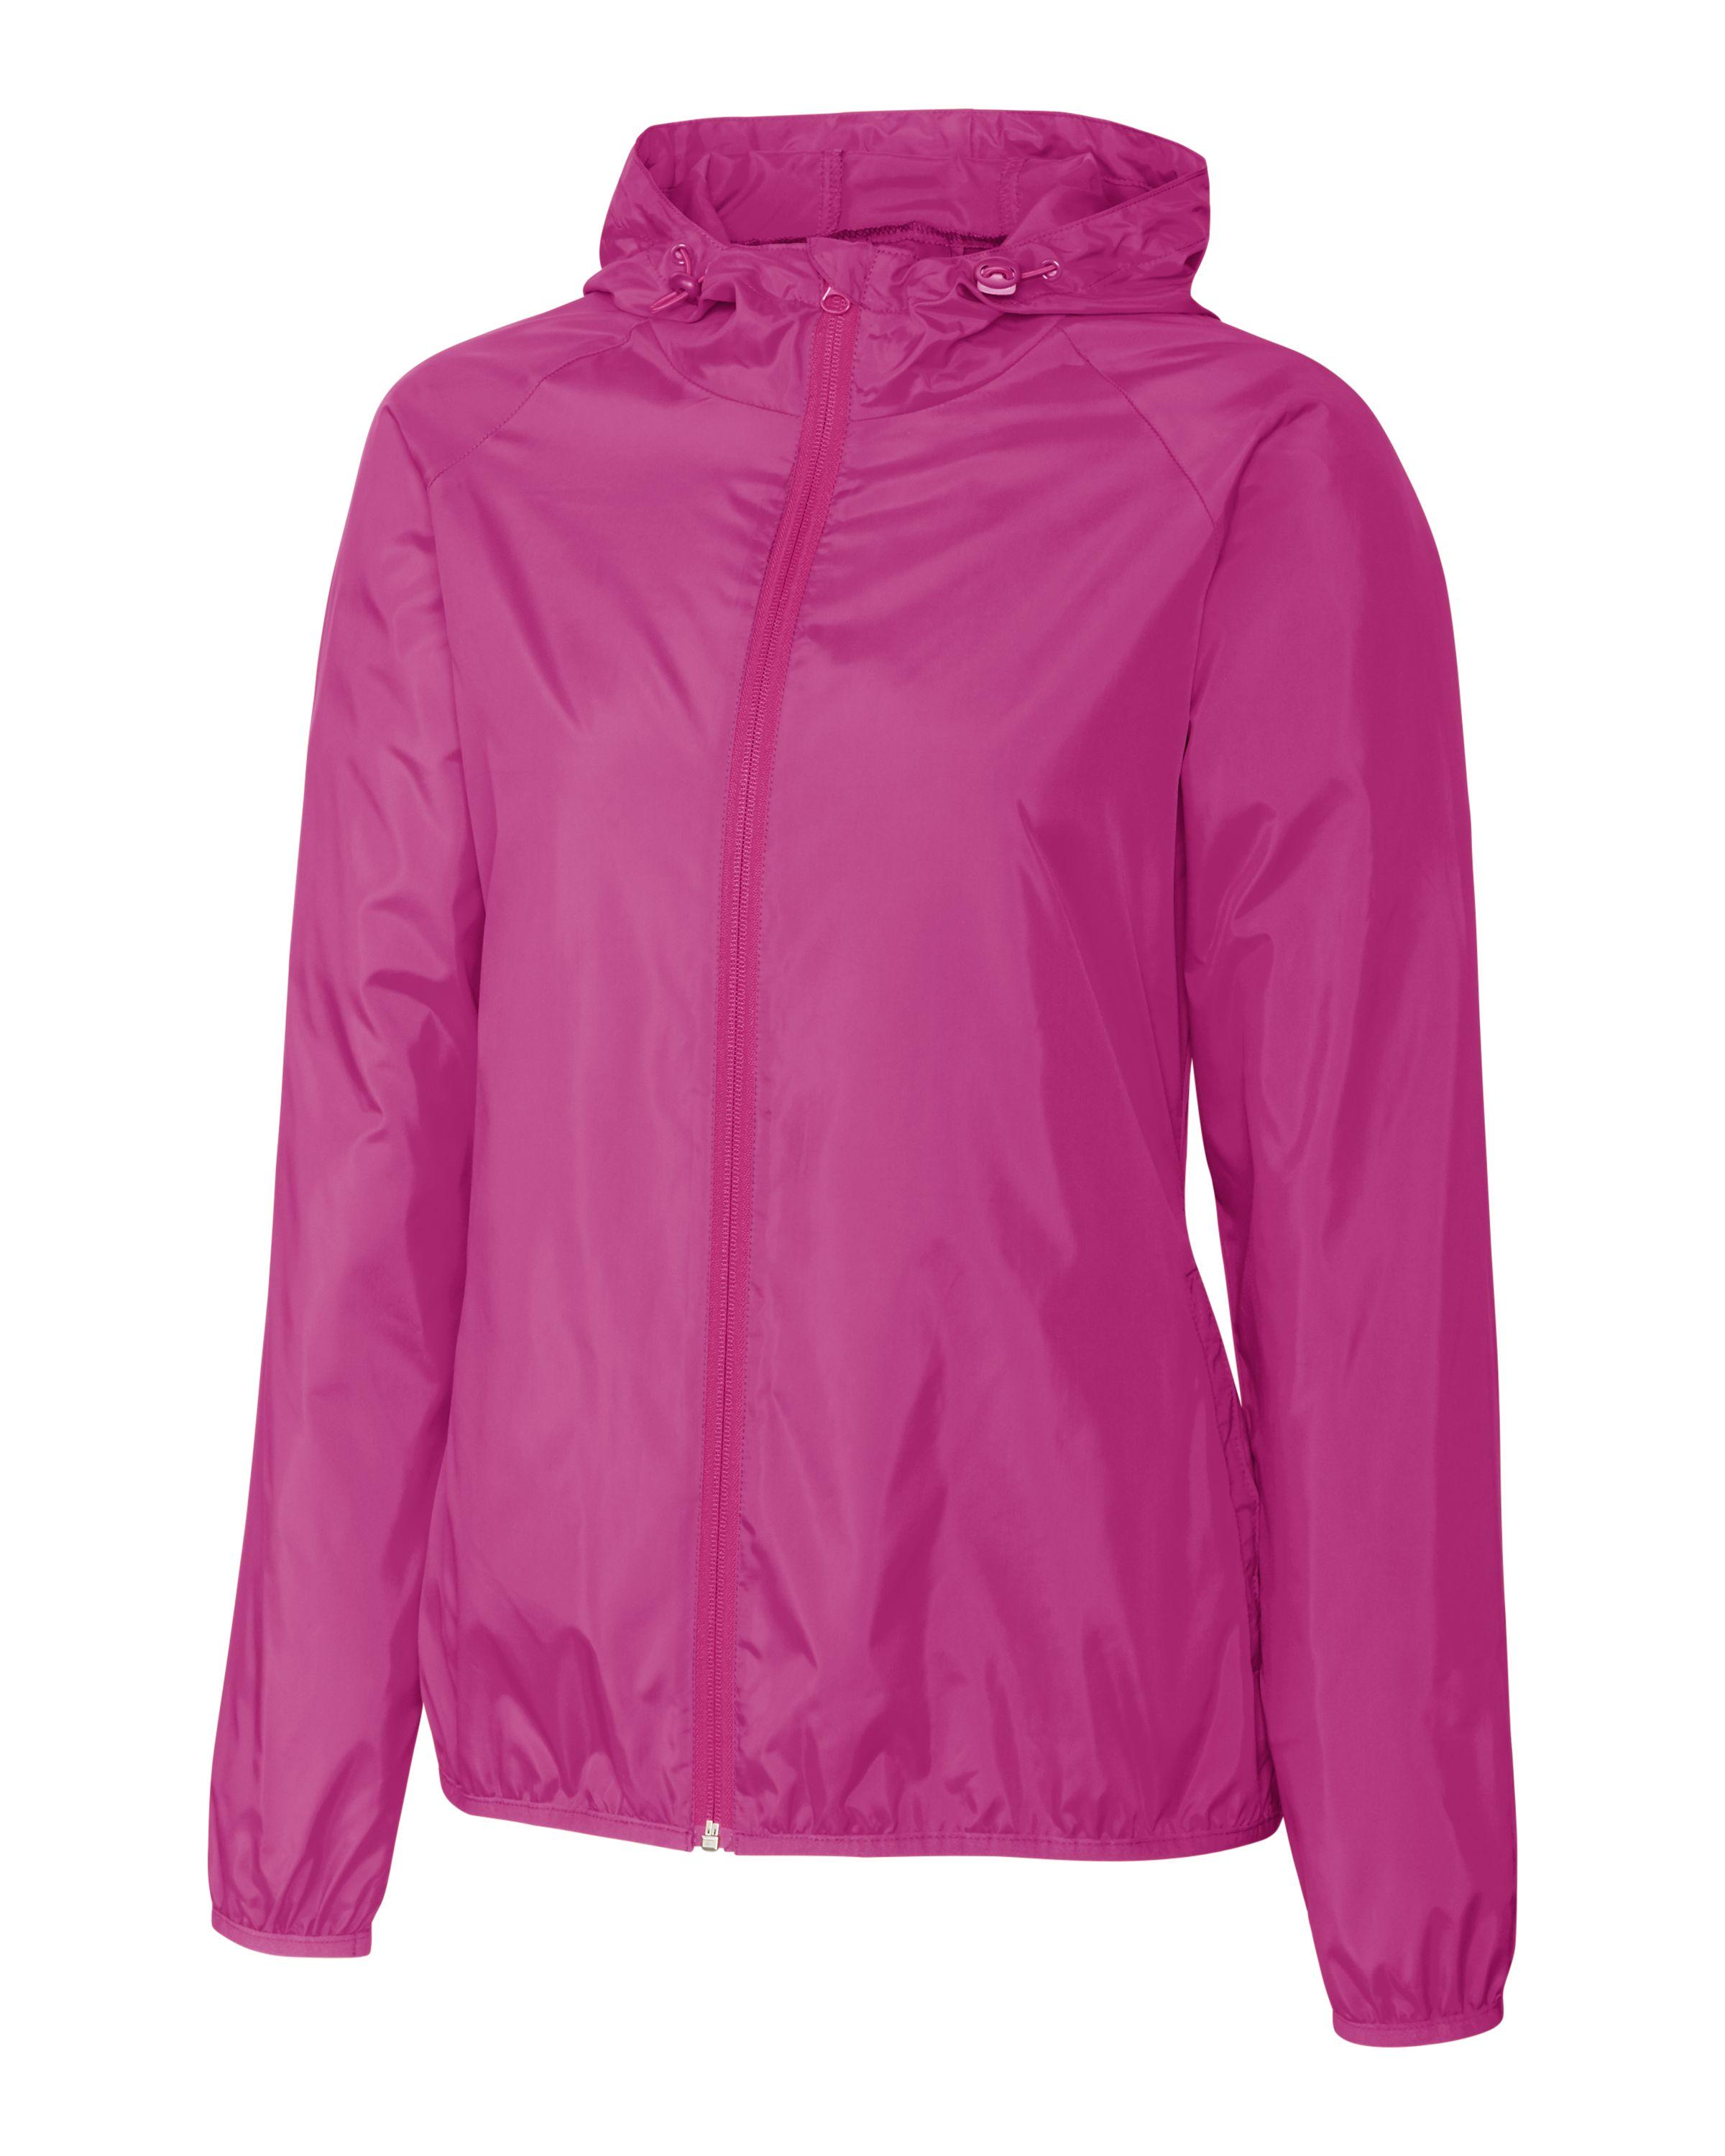 Clique Reliance Lady Packable Jacket - image 1 of 2